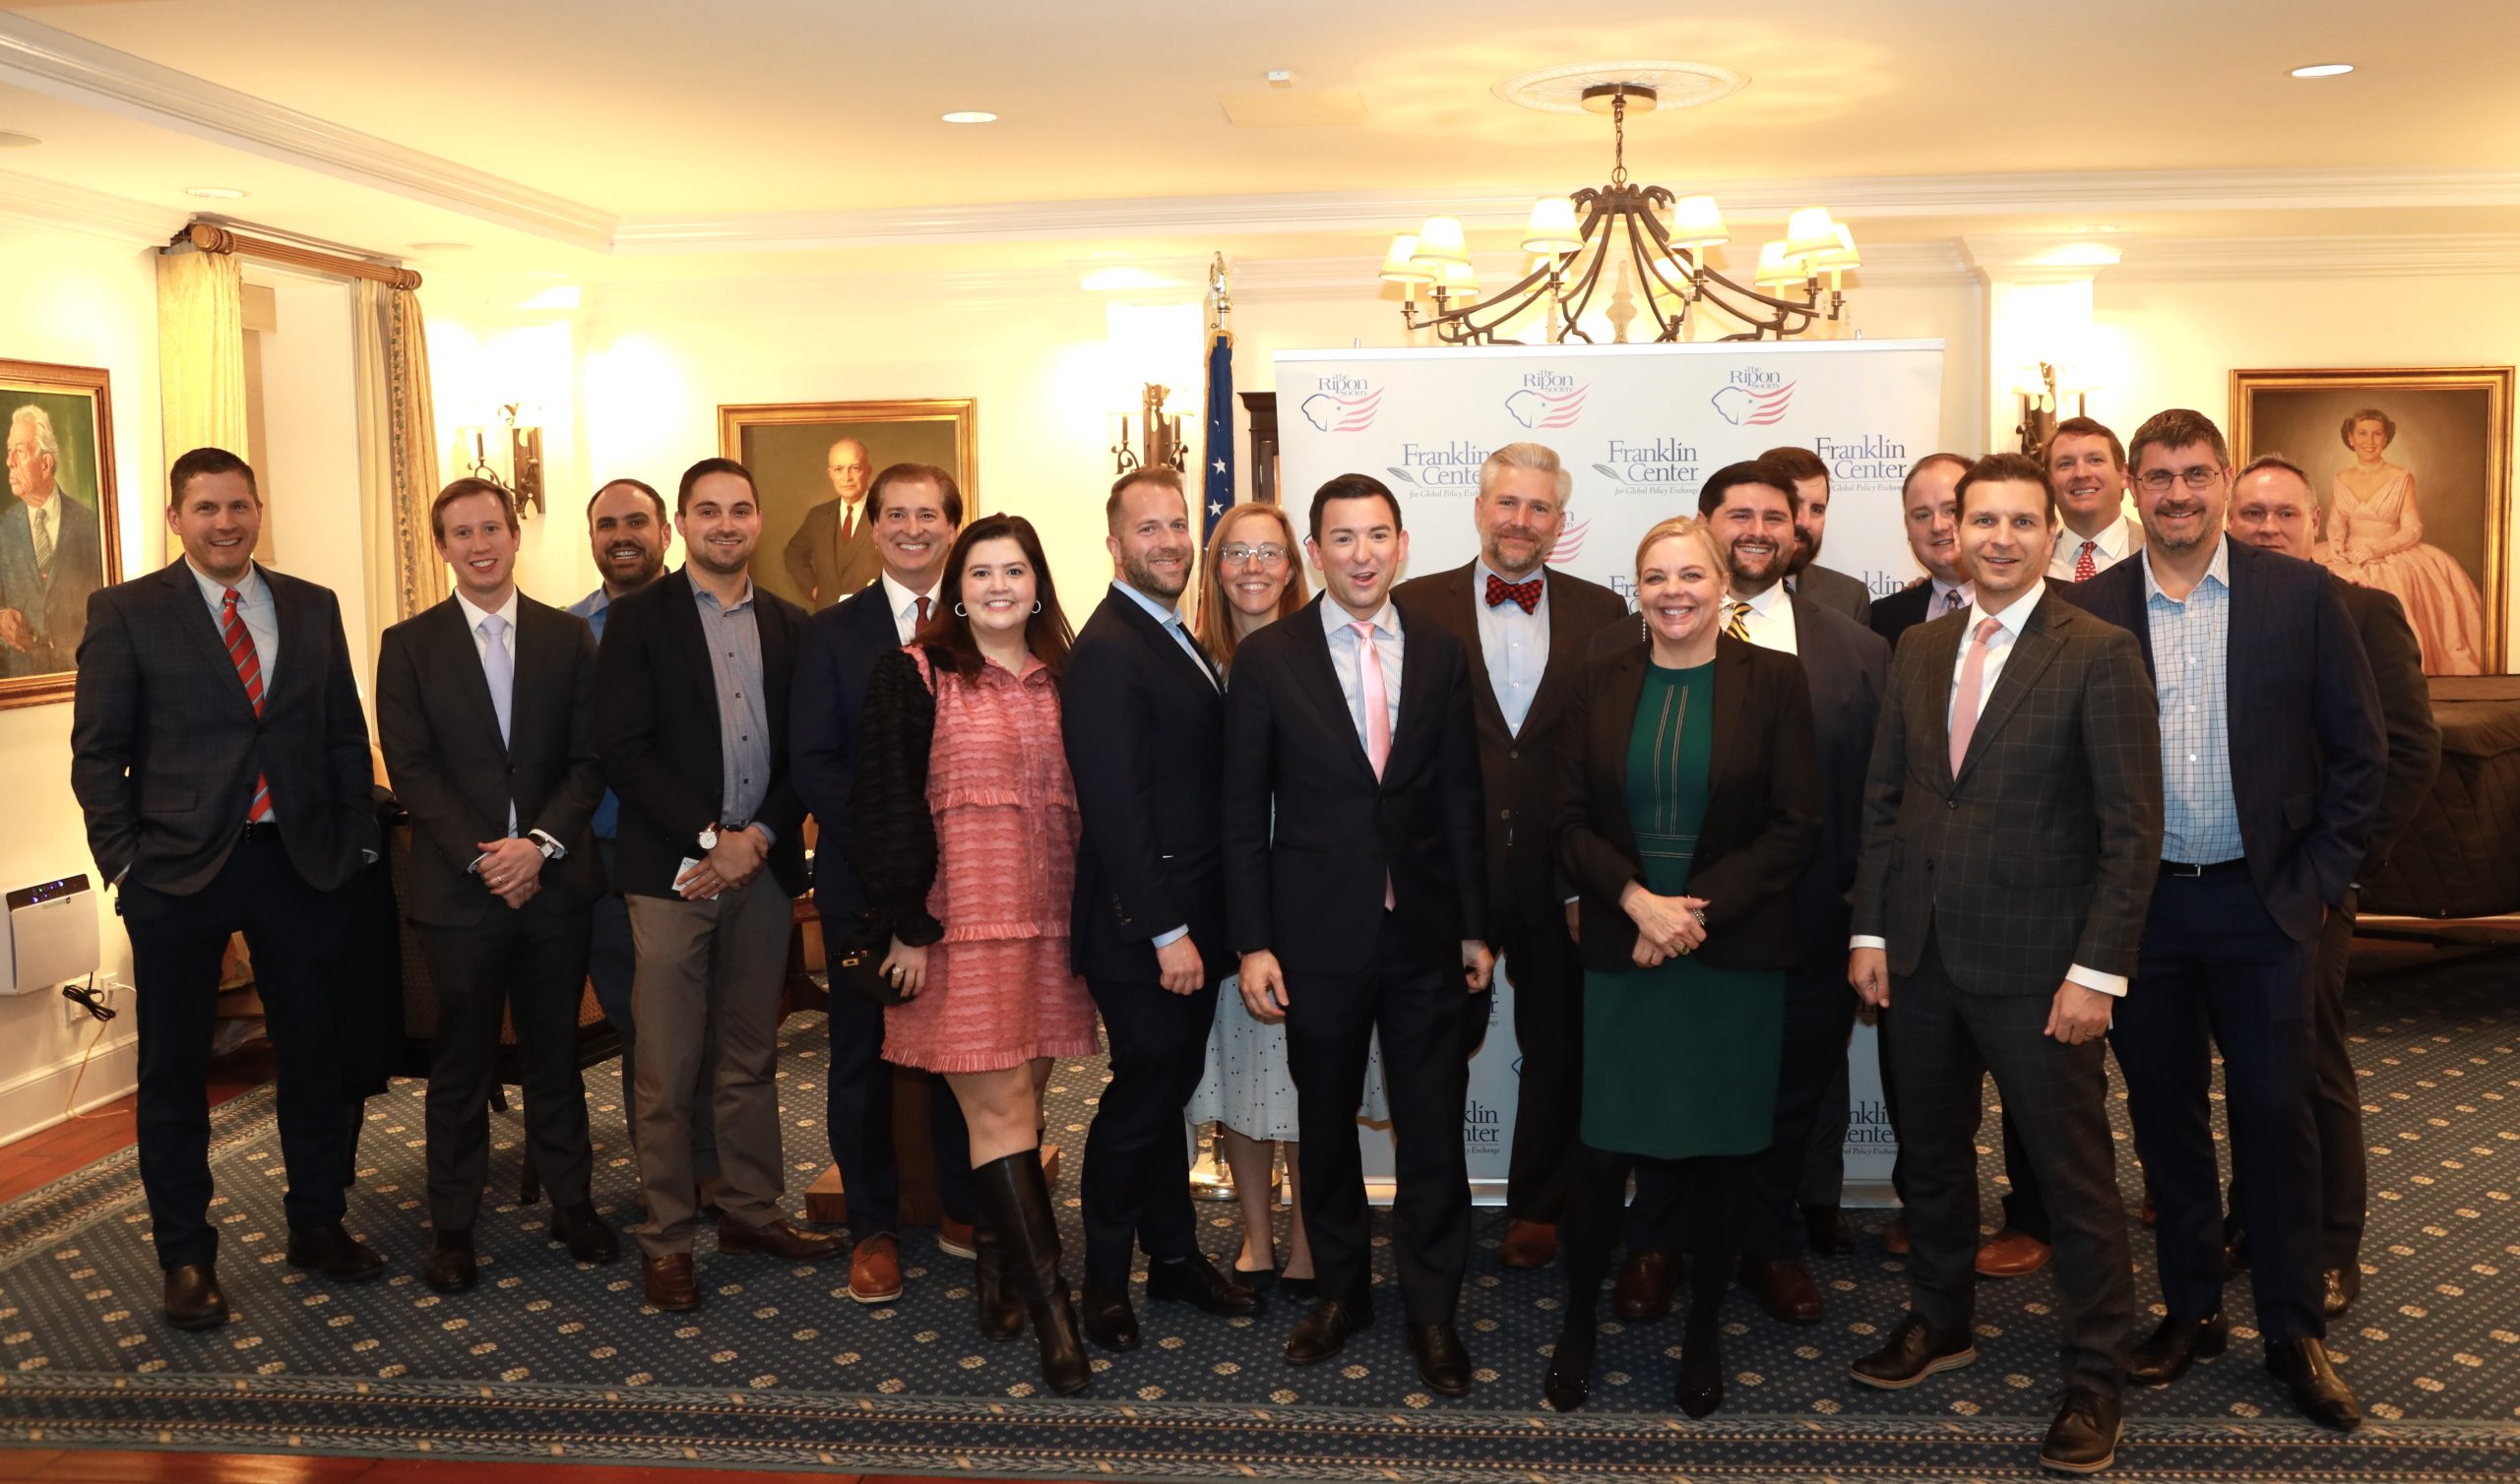 Ripon Society and Franklin Center Host Bipartisan House Chiefs of Staff Association to Kick Off New Year